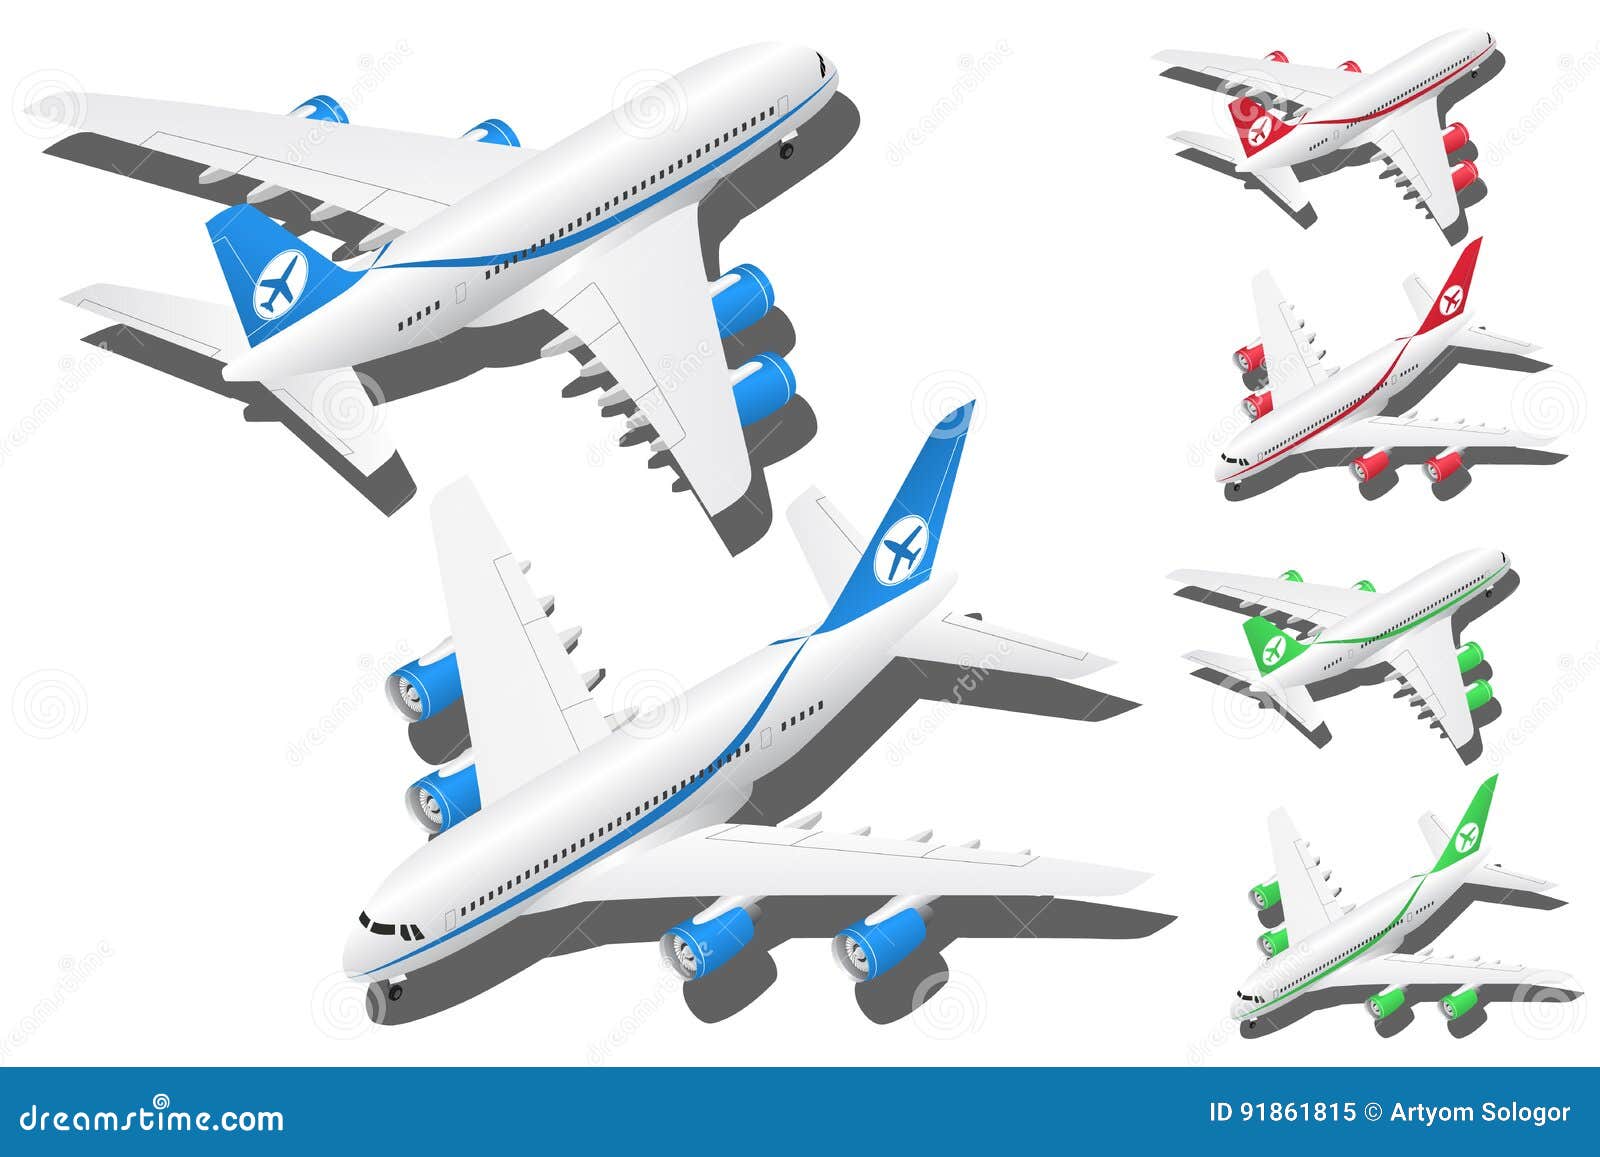  isometric planes set of 2  in in different colors